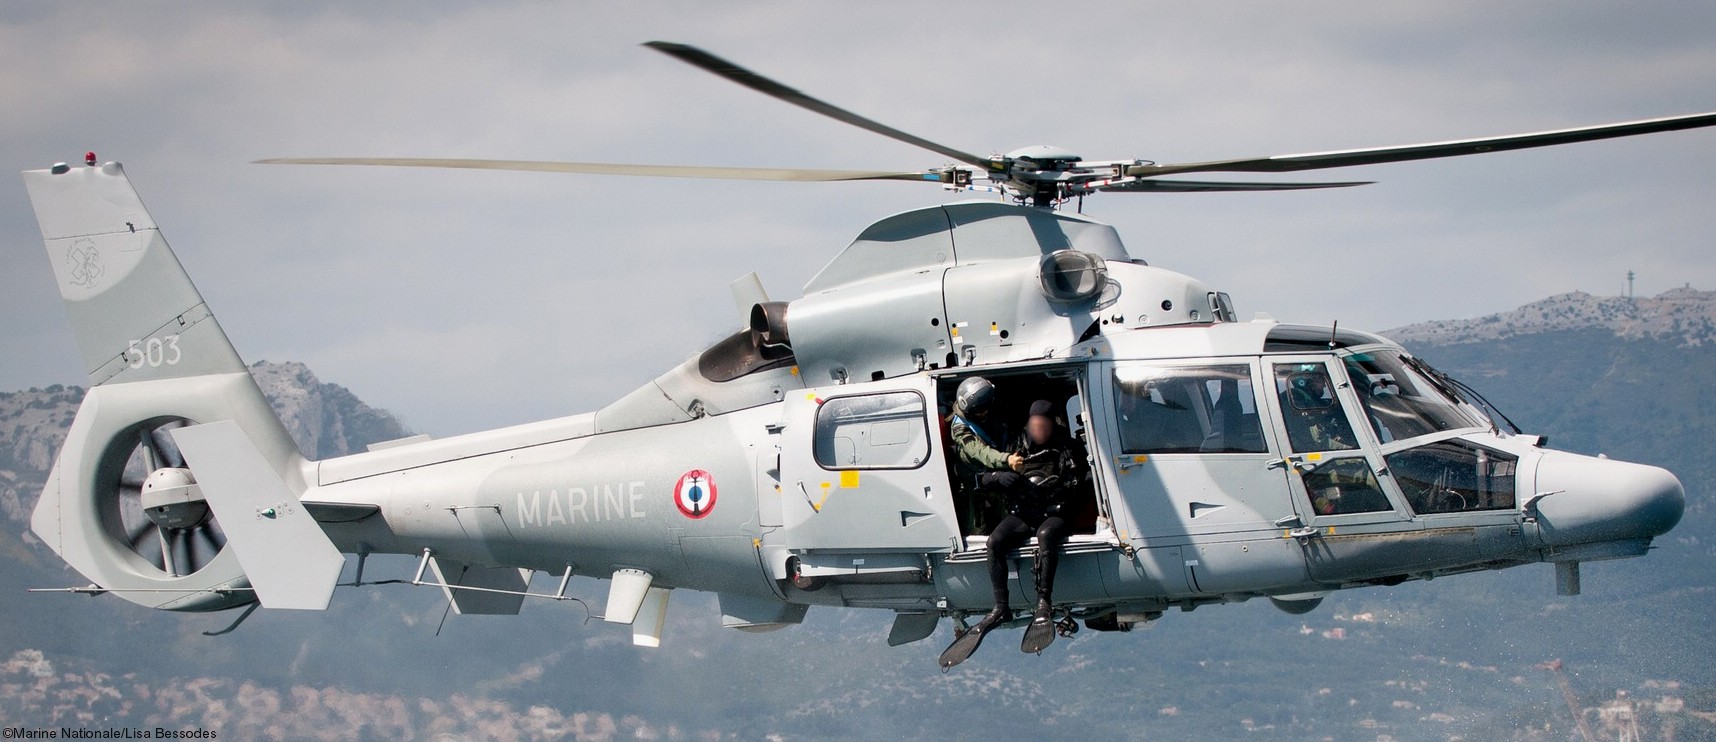 as-565sa panther helicopter french navy marine nationale flottille 36f ban hyeres toulon 503 51